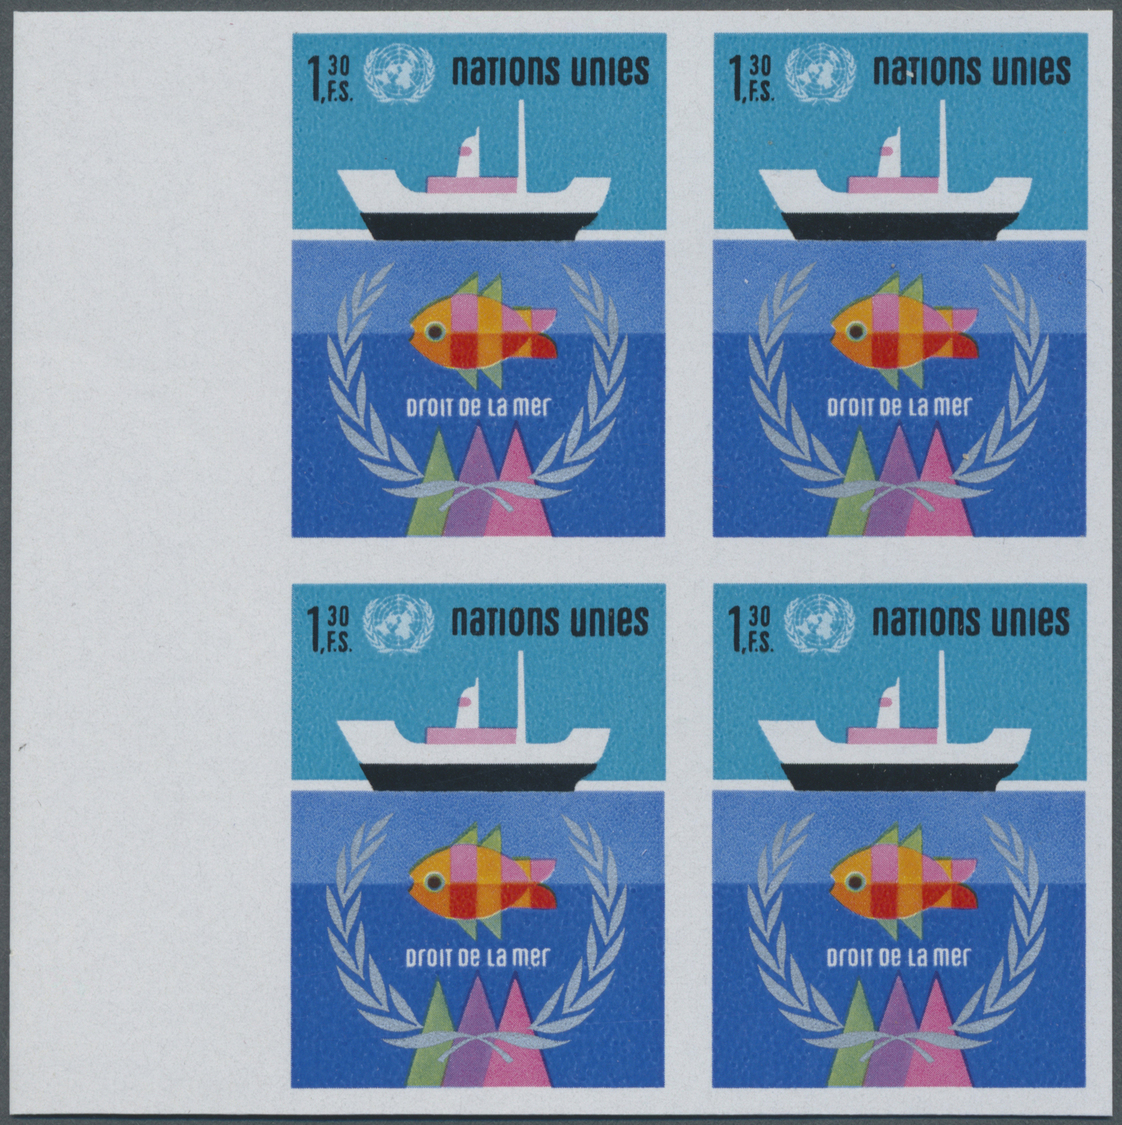 ** Vereinte Nationen - Genf: 1974. Imperforate Block Of 4 For The Issue "UN Conference On The Law Of The Sea" Sho - Unused Stamps